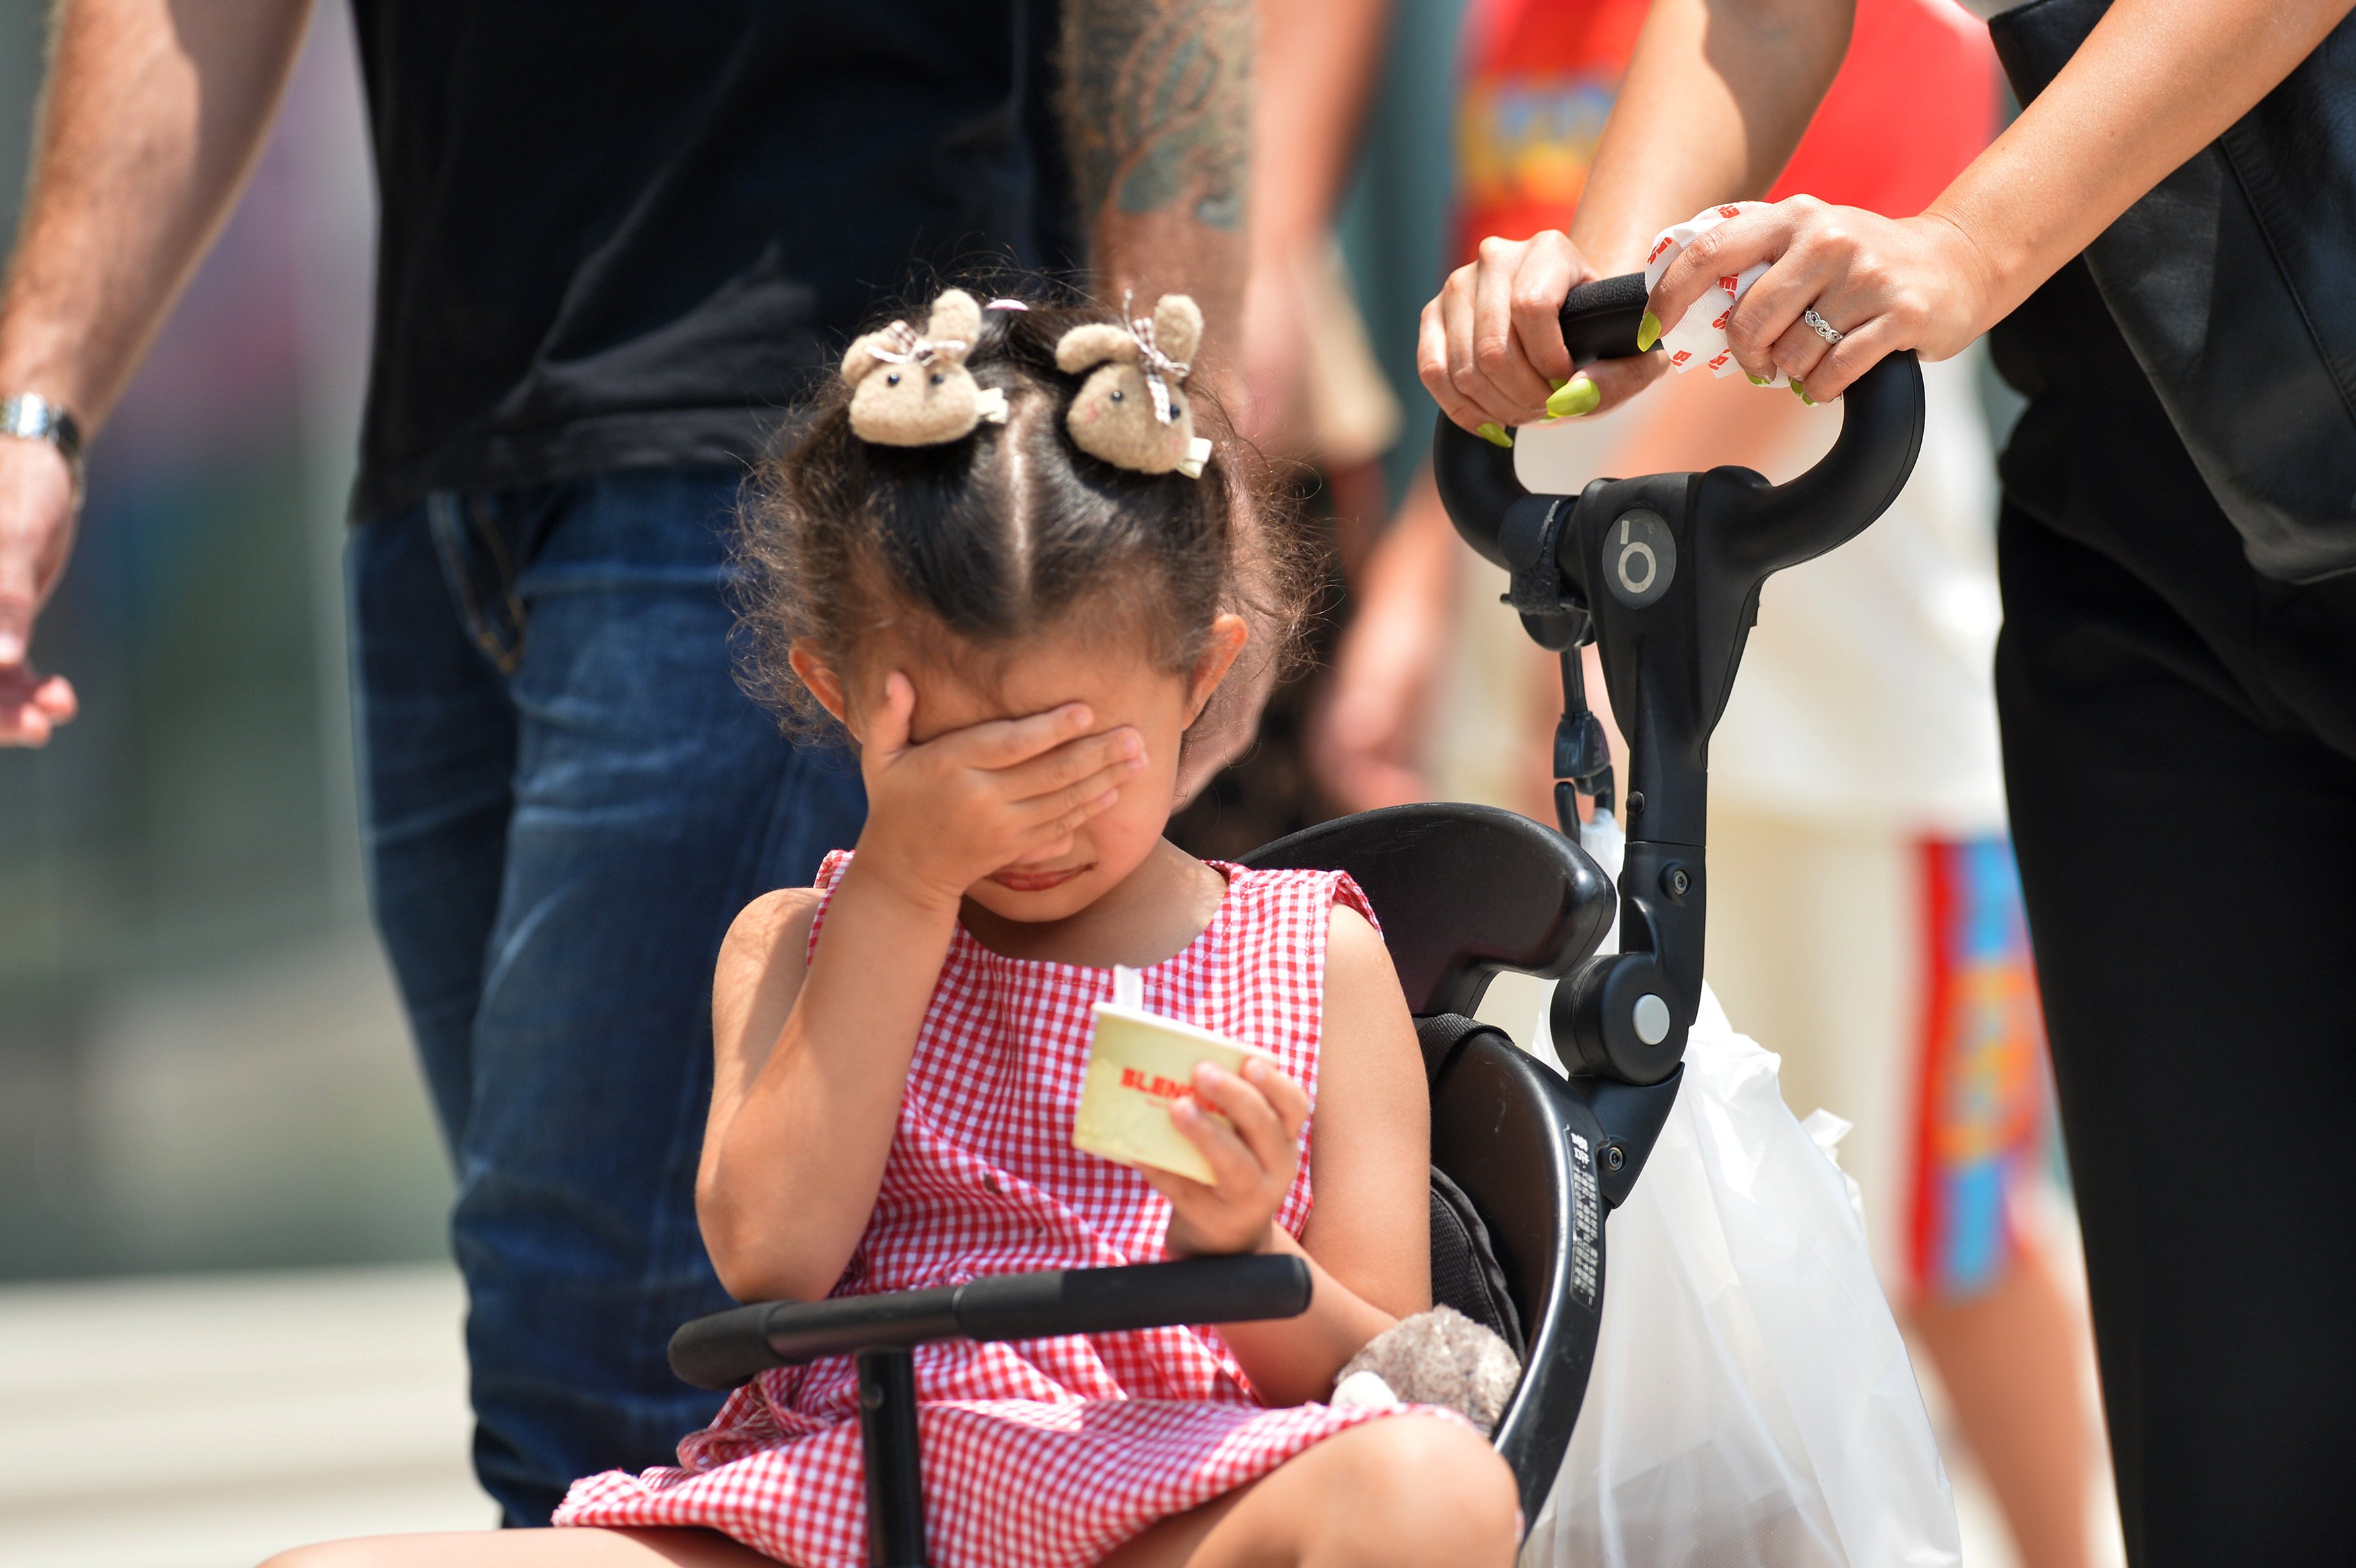 A child shades herself from the sunshine in Bangkok, Thailand, during a heatwave, with temperatures reaching 43 degrees Celsius. Photo: Xinhua